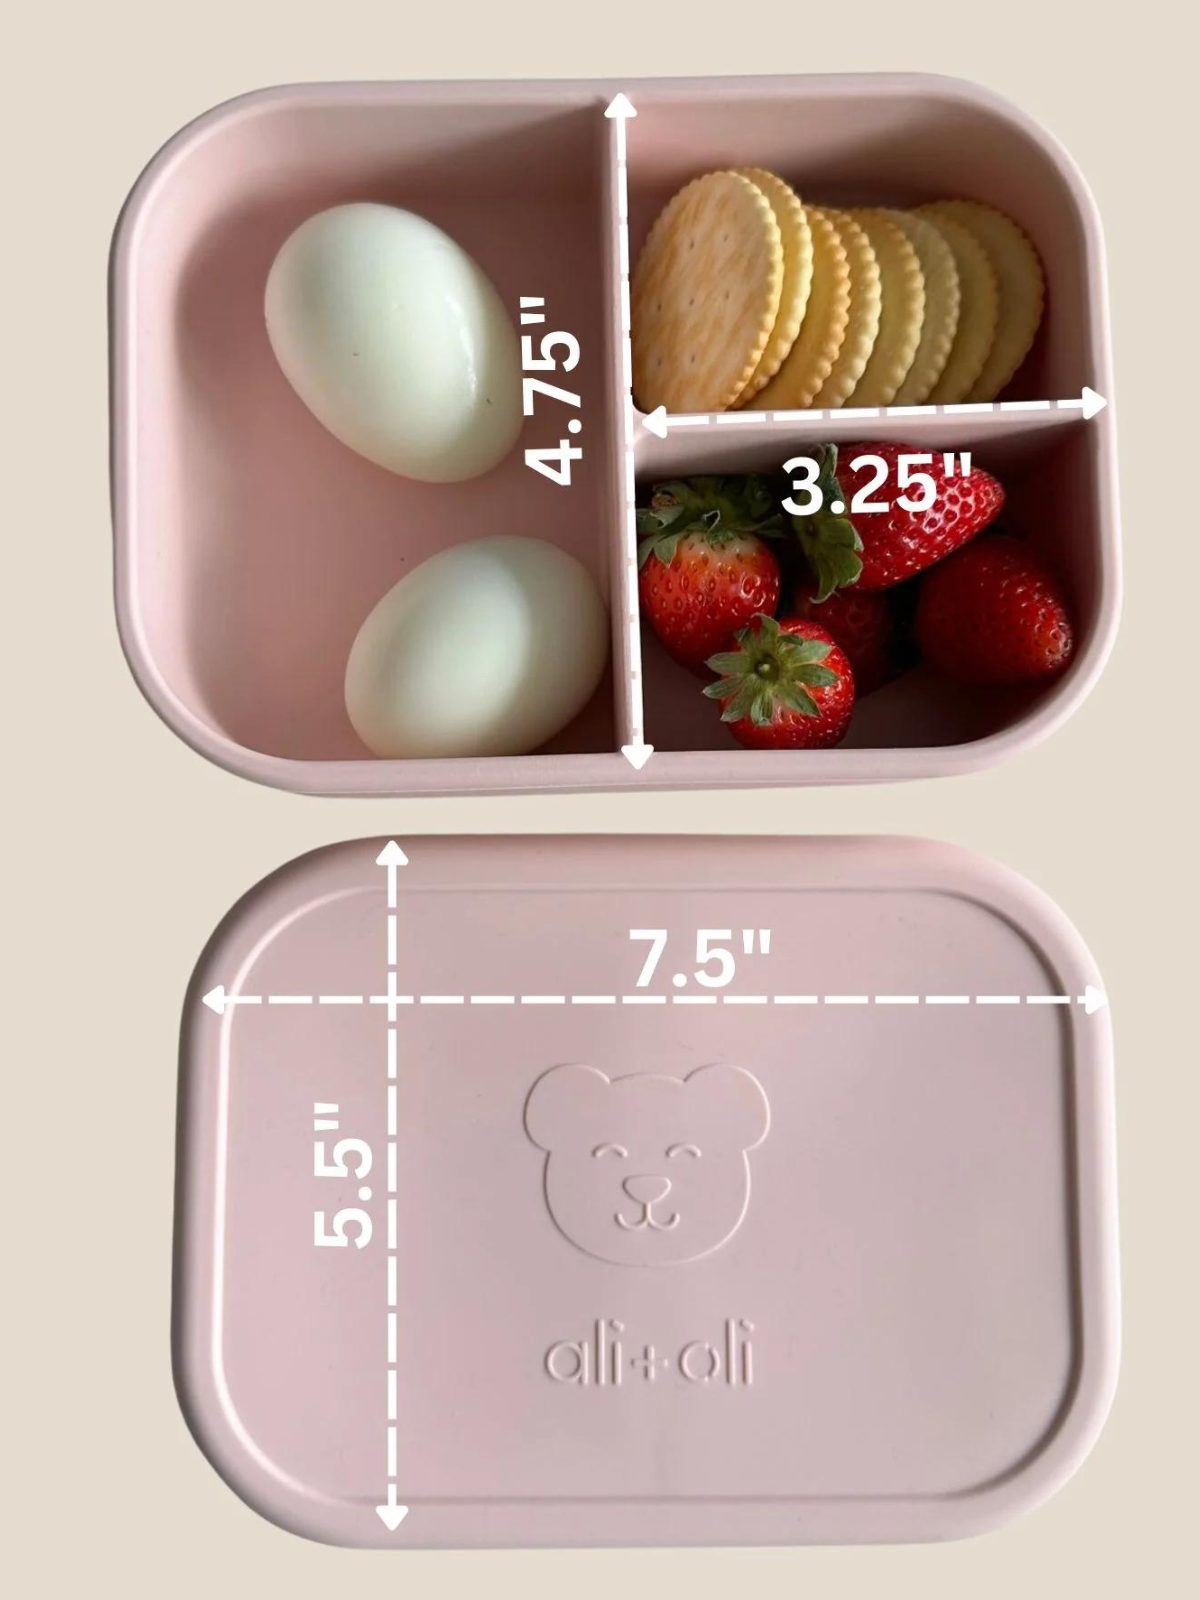 Bento Box - 3 Compartments / Leakproof, Blush